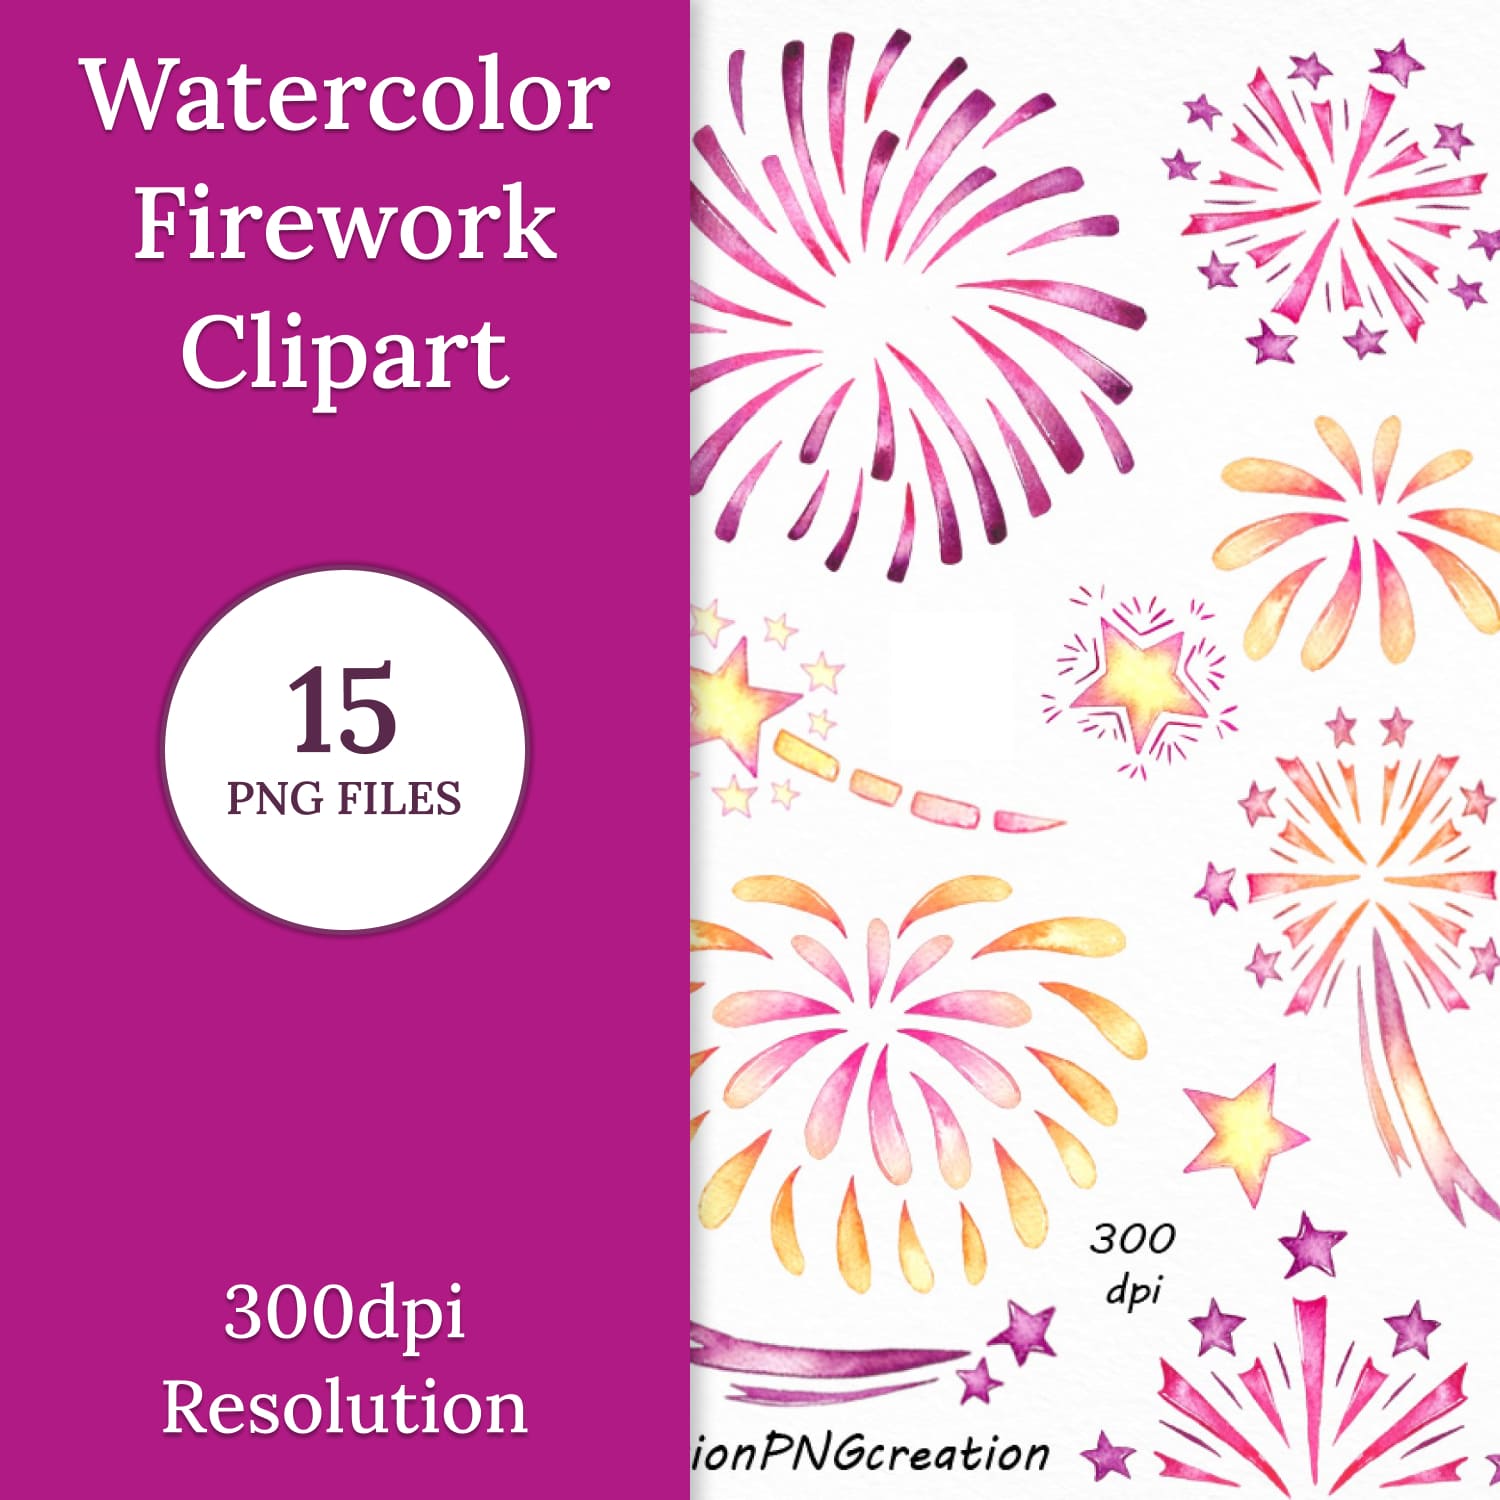 Watercolor Firework Clipart - main image preview.